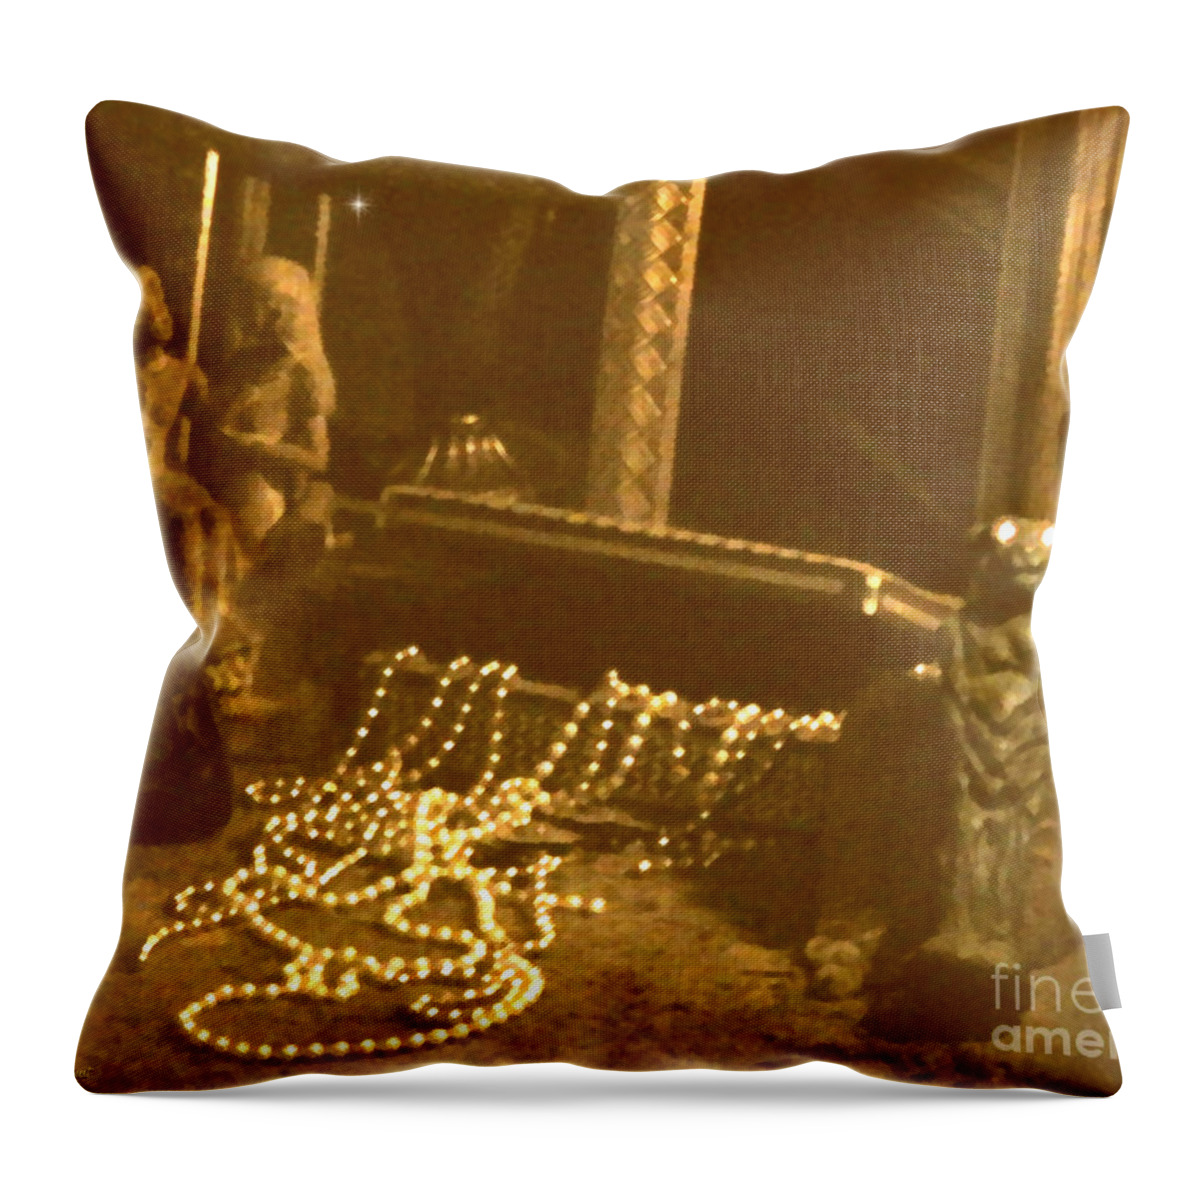 Cristopher Ernest Throw Pillow featuring the photograph All That Glitters by Cristophers Dream Artistry